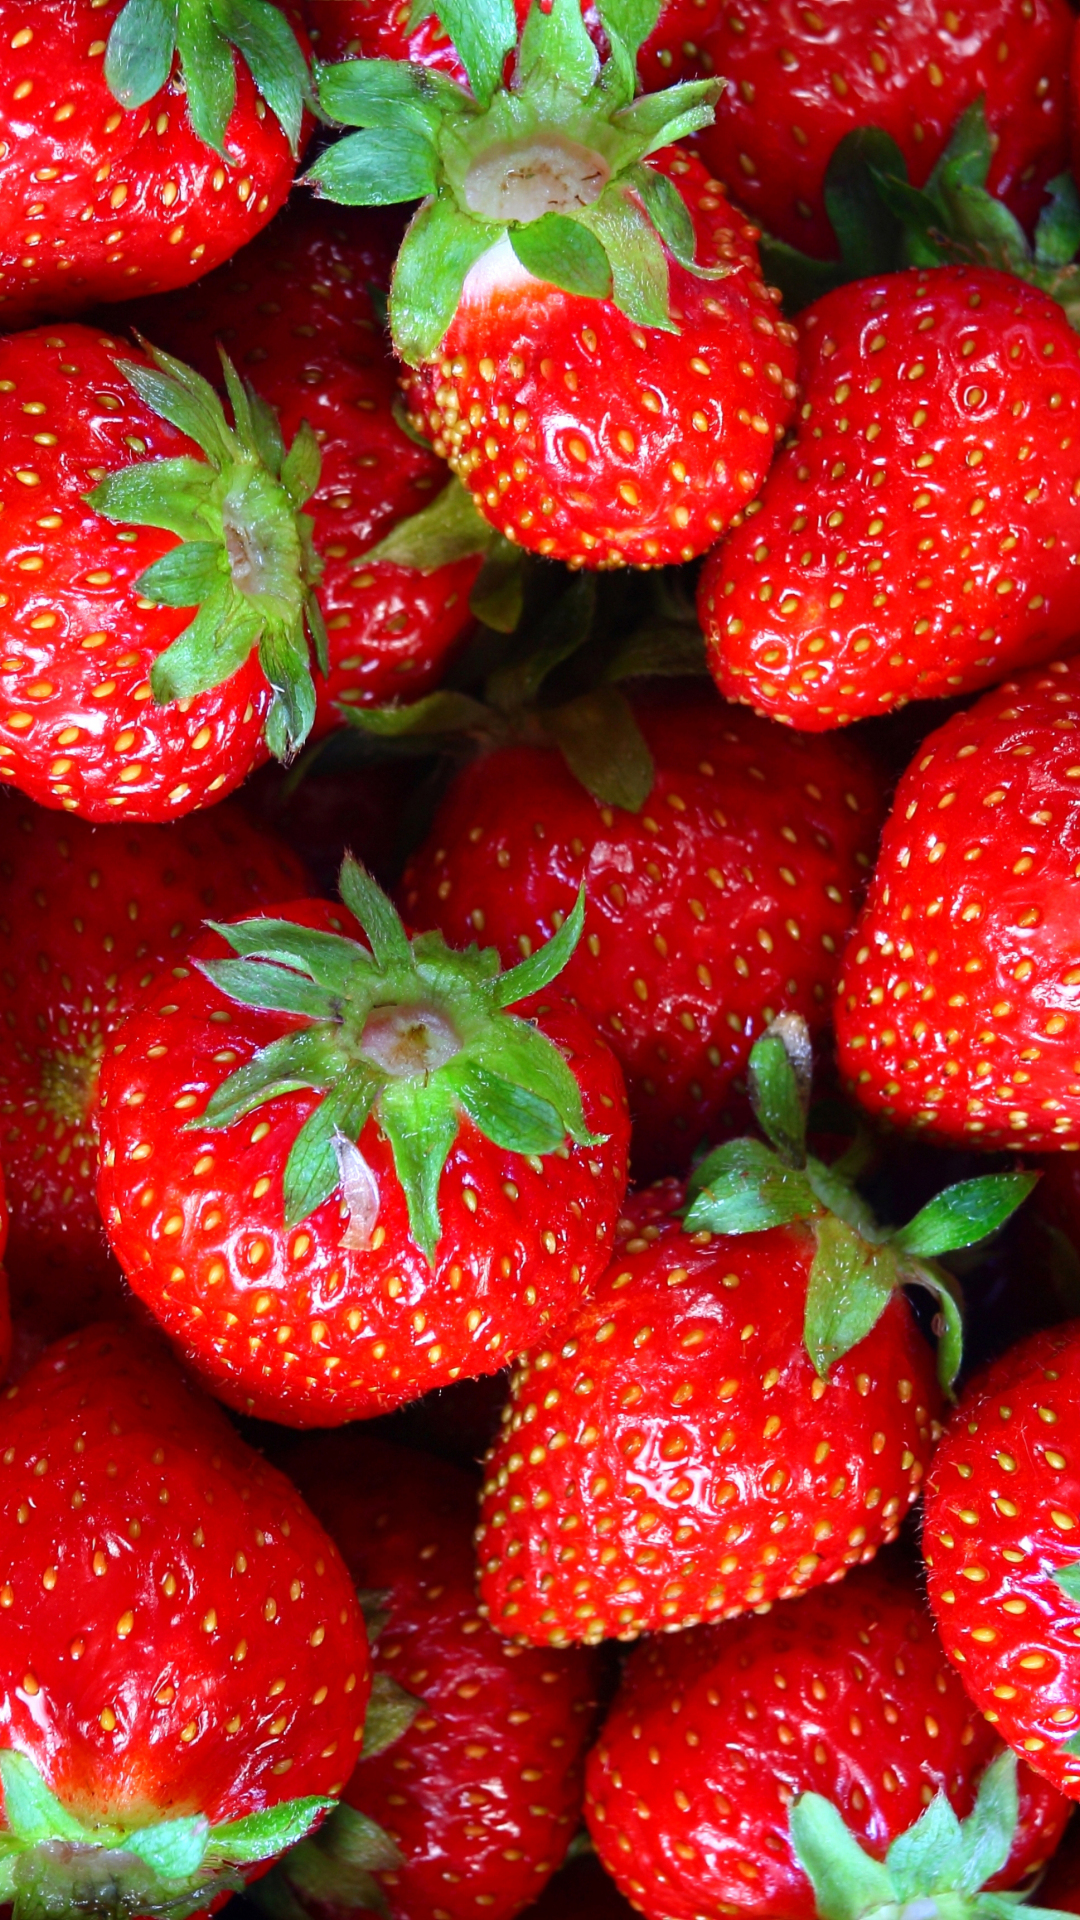 Strawberry IPhone Wallpaper HD  IPhone Wallpapers  iPhone Wallpapers